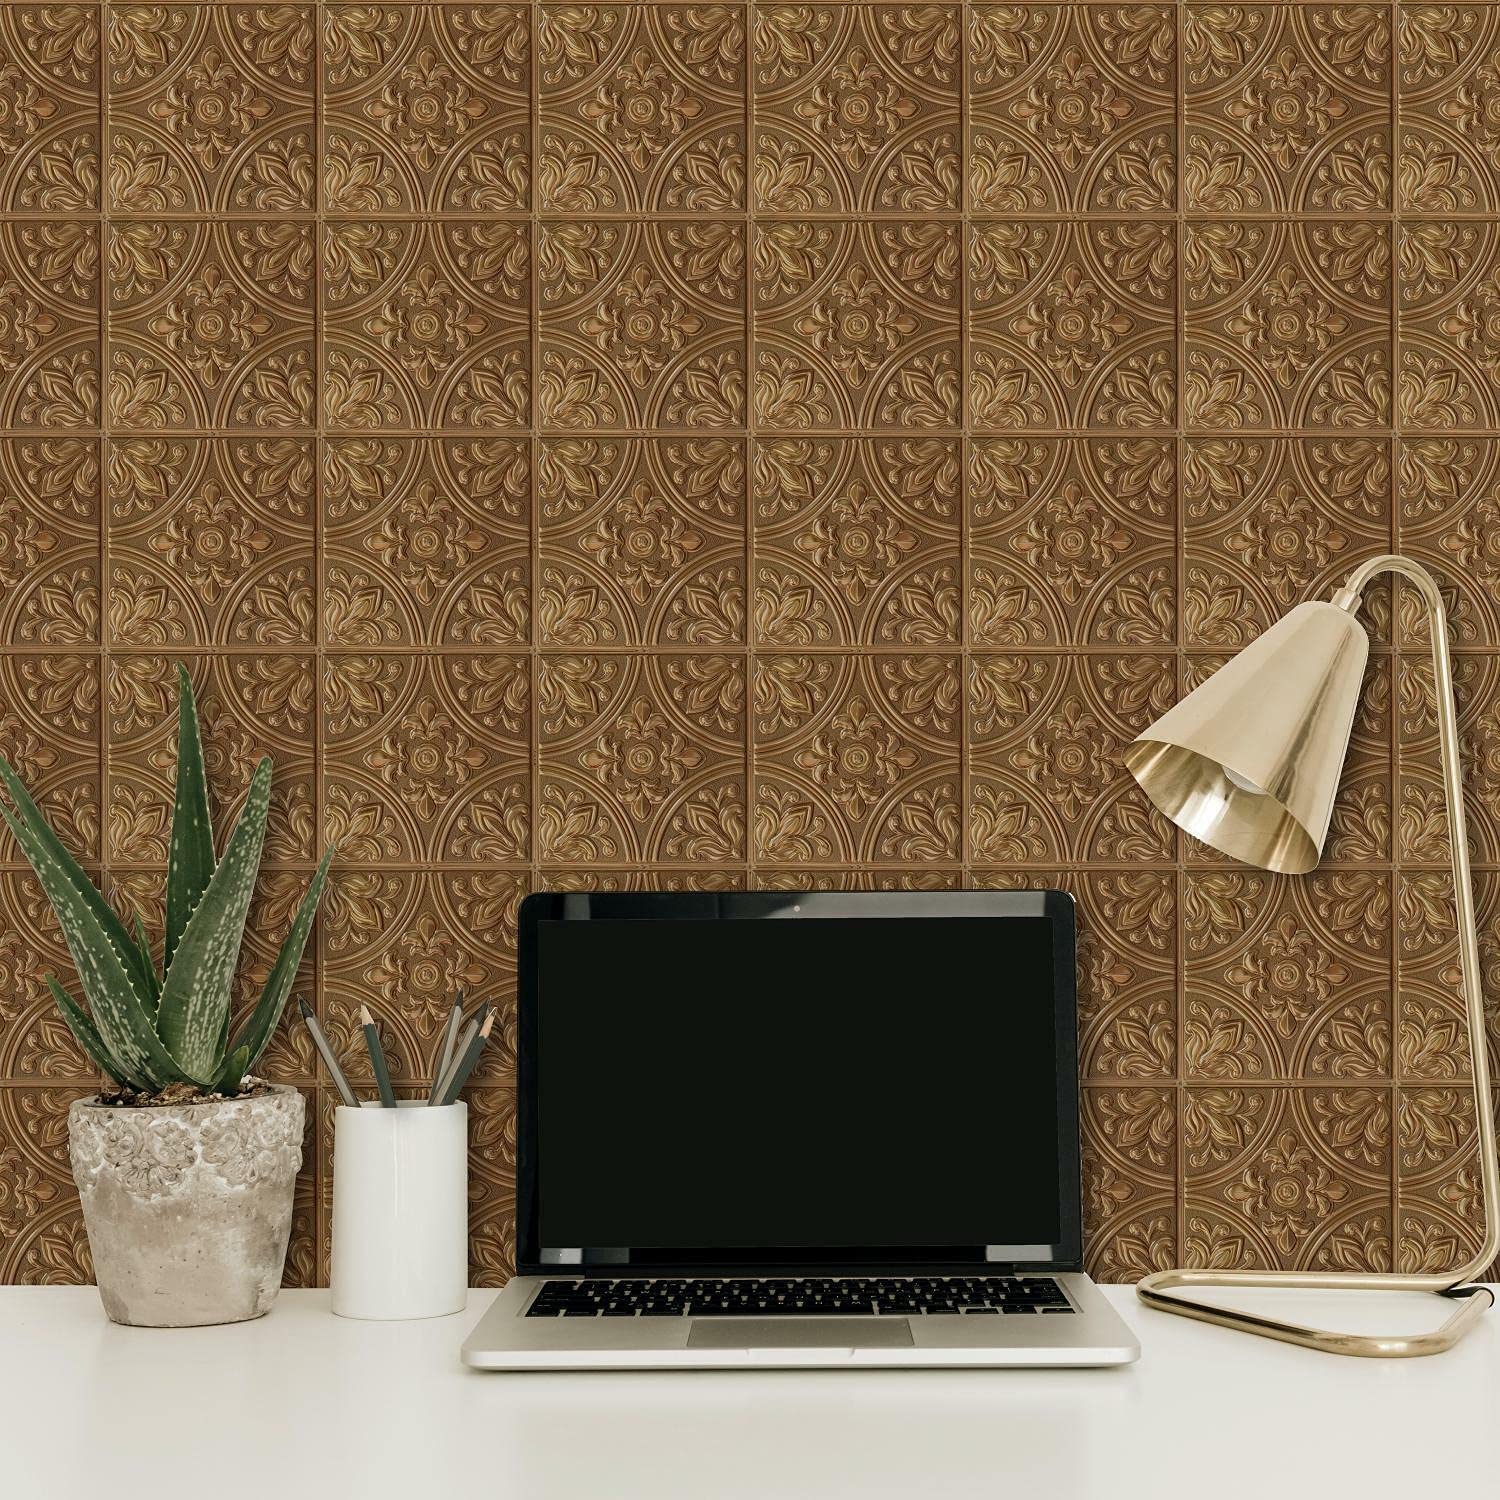 Roommates Copper Tin Tile Peel and Stick Wallpaper